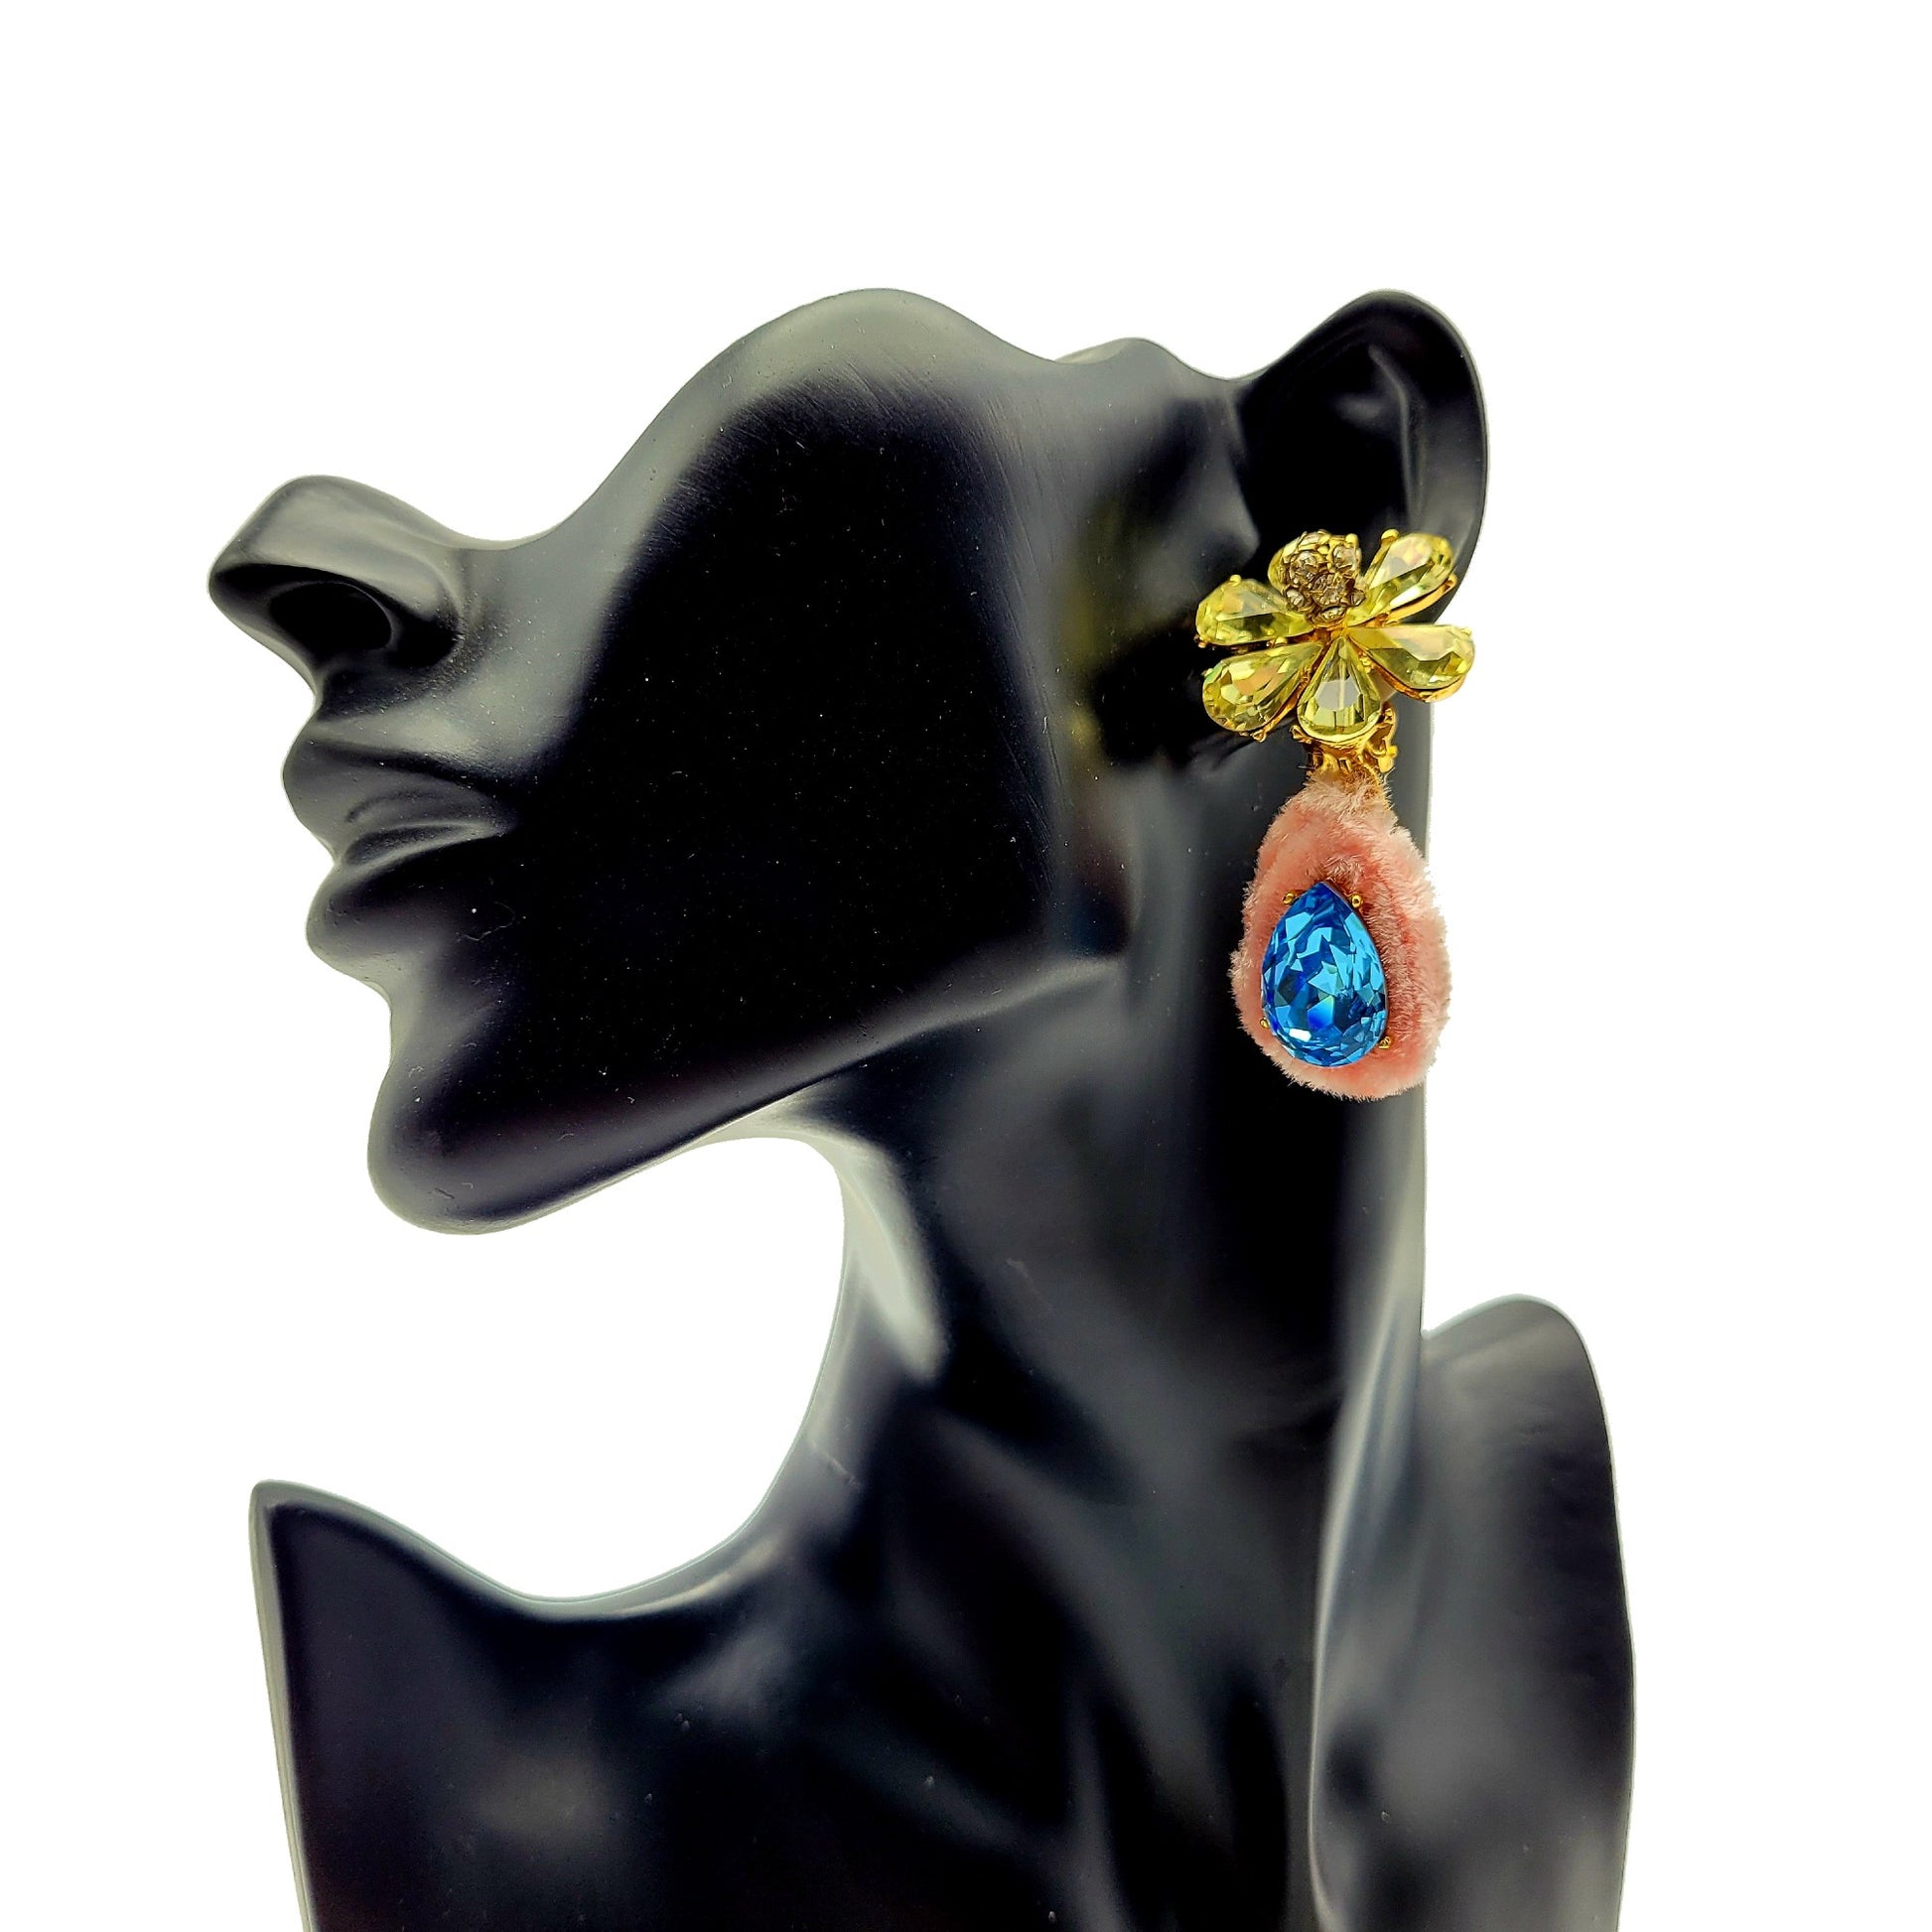 Vintage Christian Lacroix flower dangle earrings from Secondista